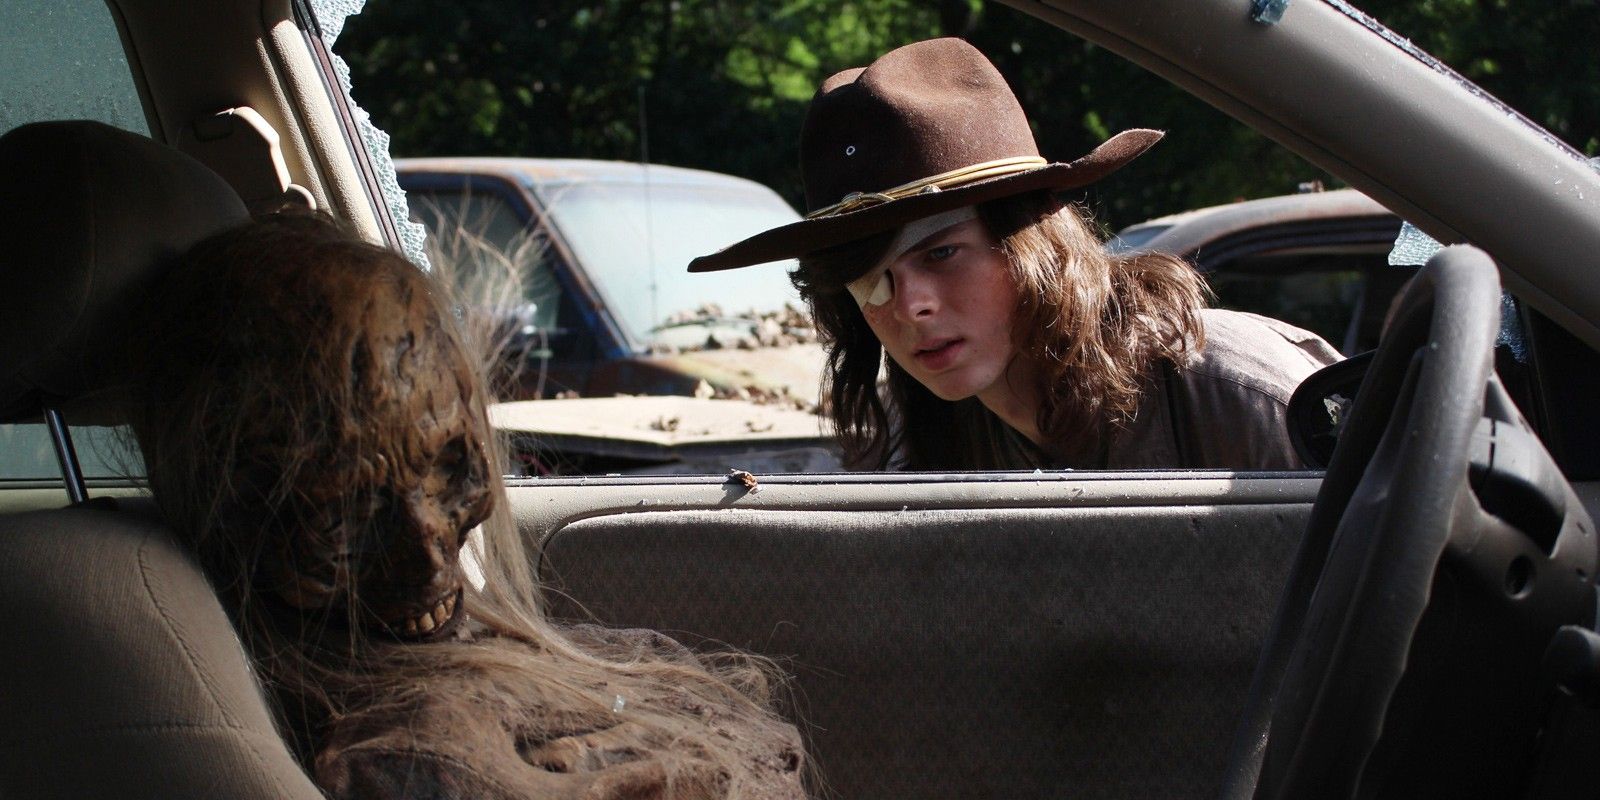 Chandler Riggs as Carl Grimes in The Walking Dead and zombie